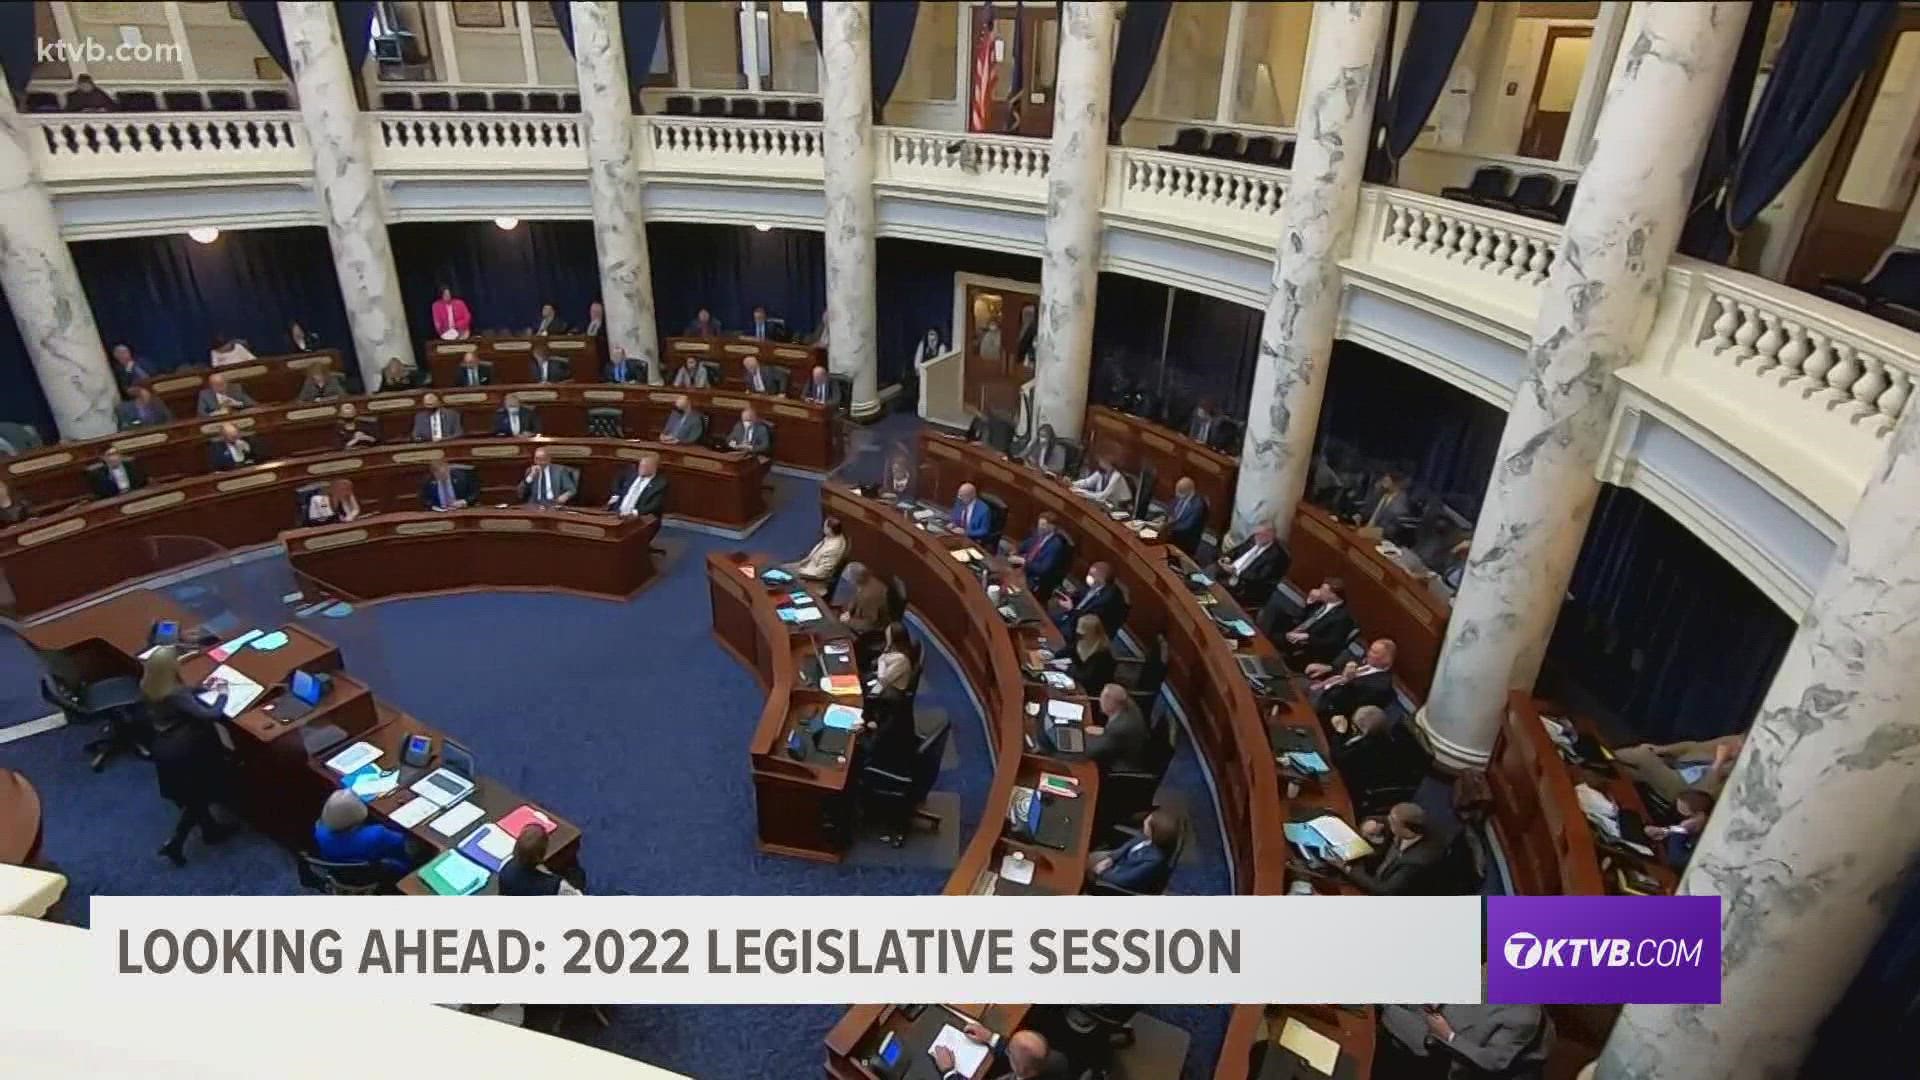 After the longest legislative year in state history, lawmakers turn the page to 2022 and kick off the year in less than two weeks.